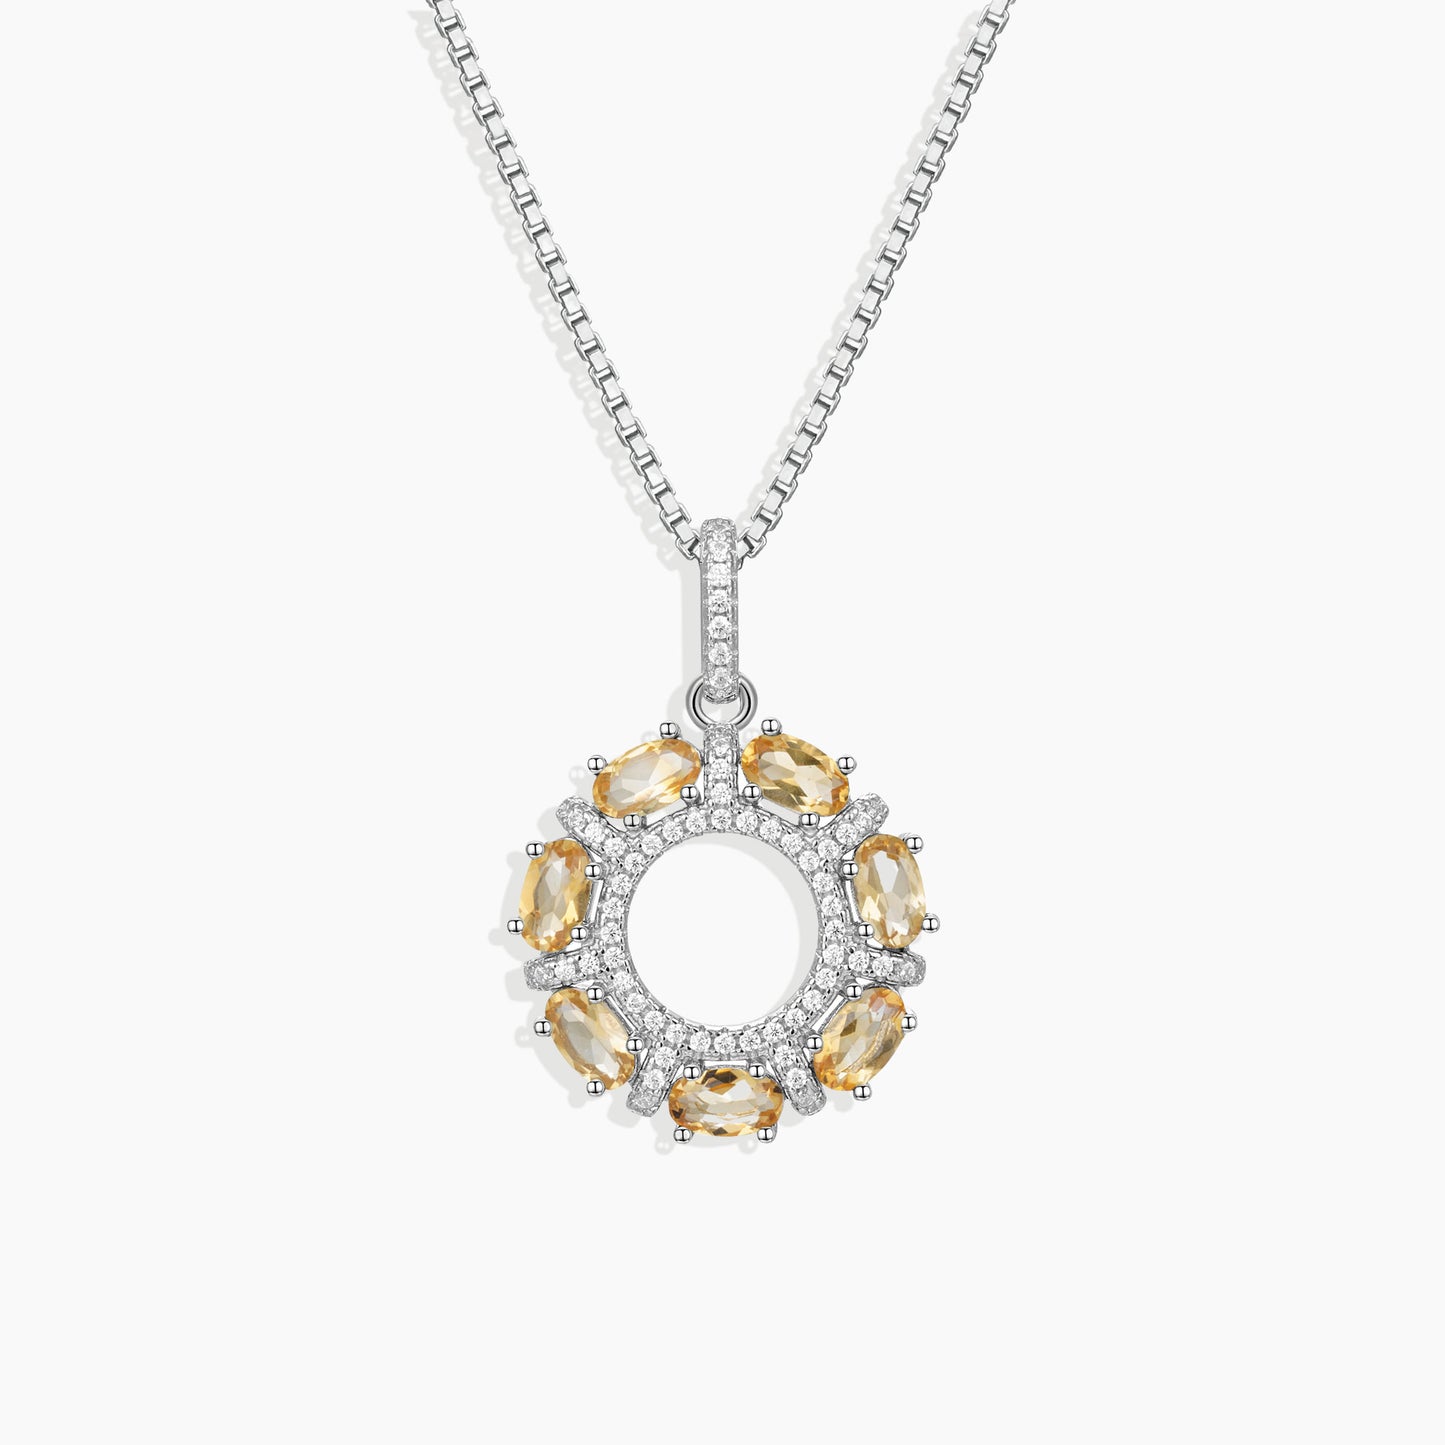 Citrine Galaxy Pendant Necklace in Sterling Silver